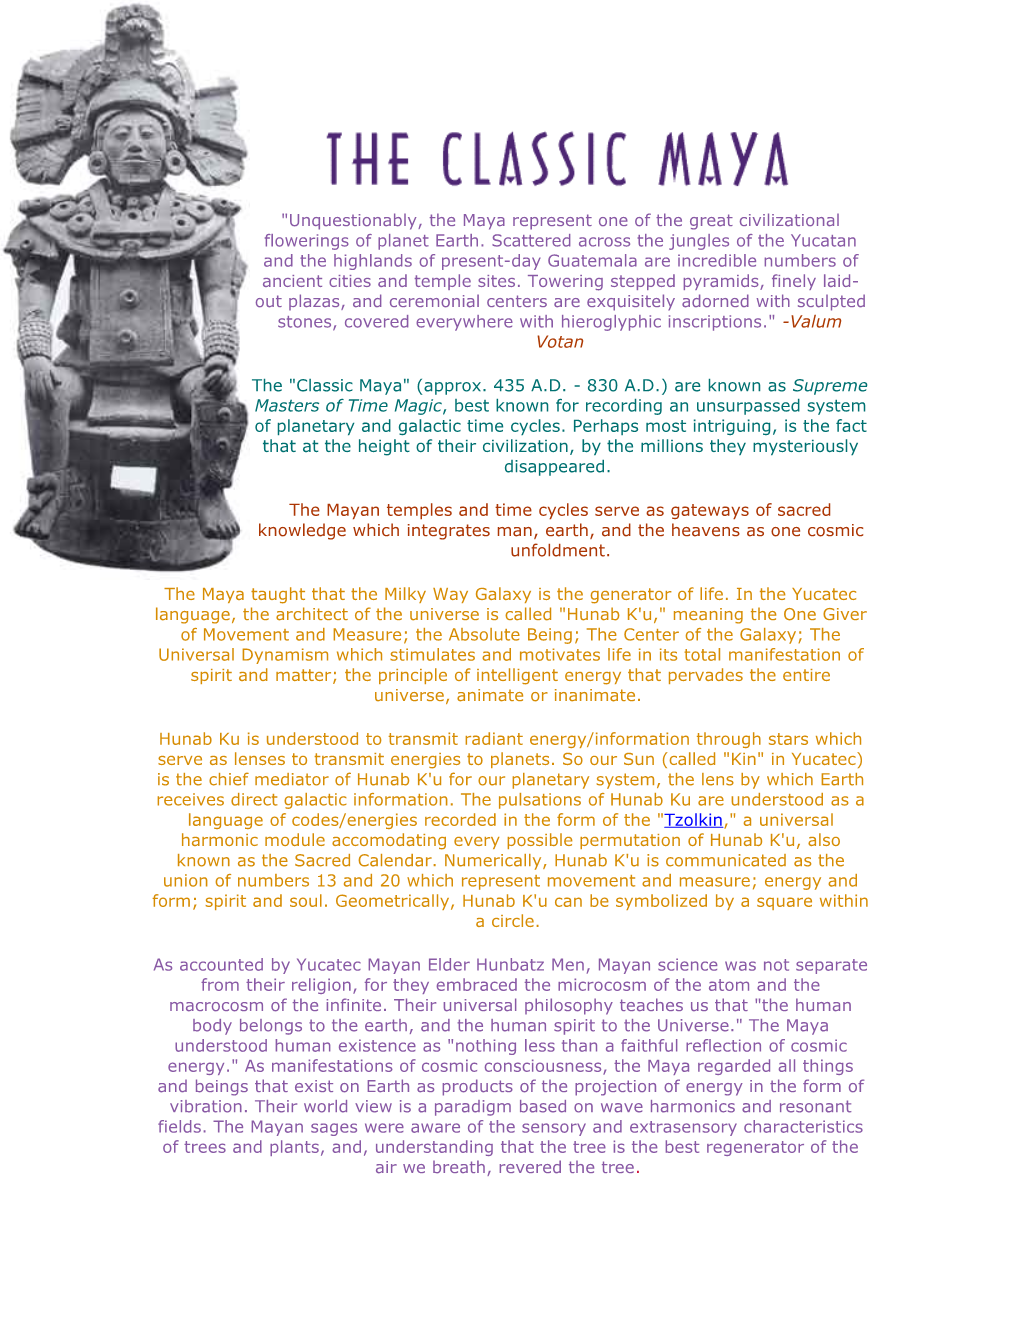 Unquestionably, the Maya Represent One of the Great Civilizational Flowerings of Planet